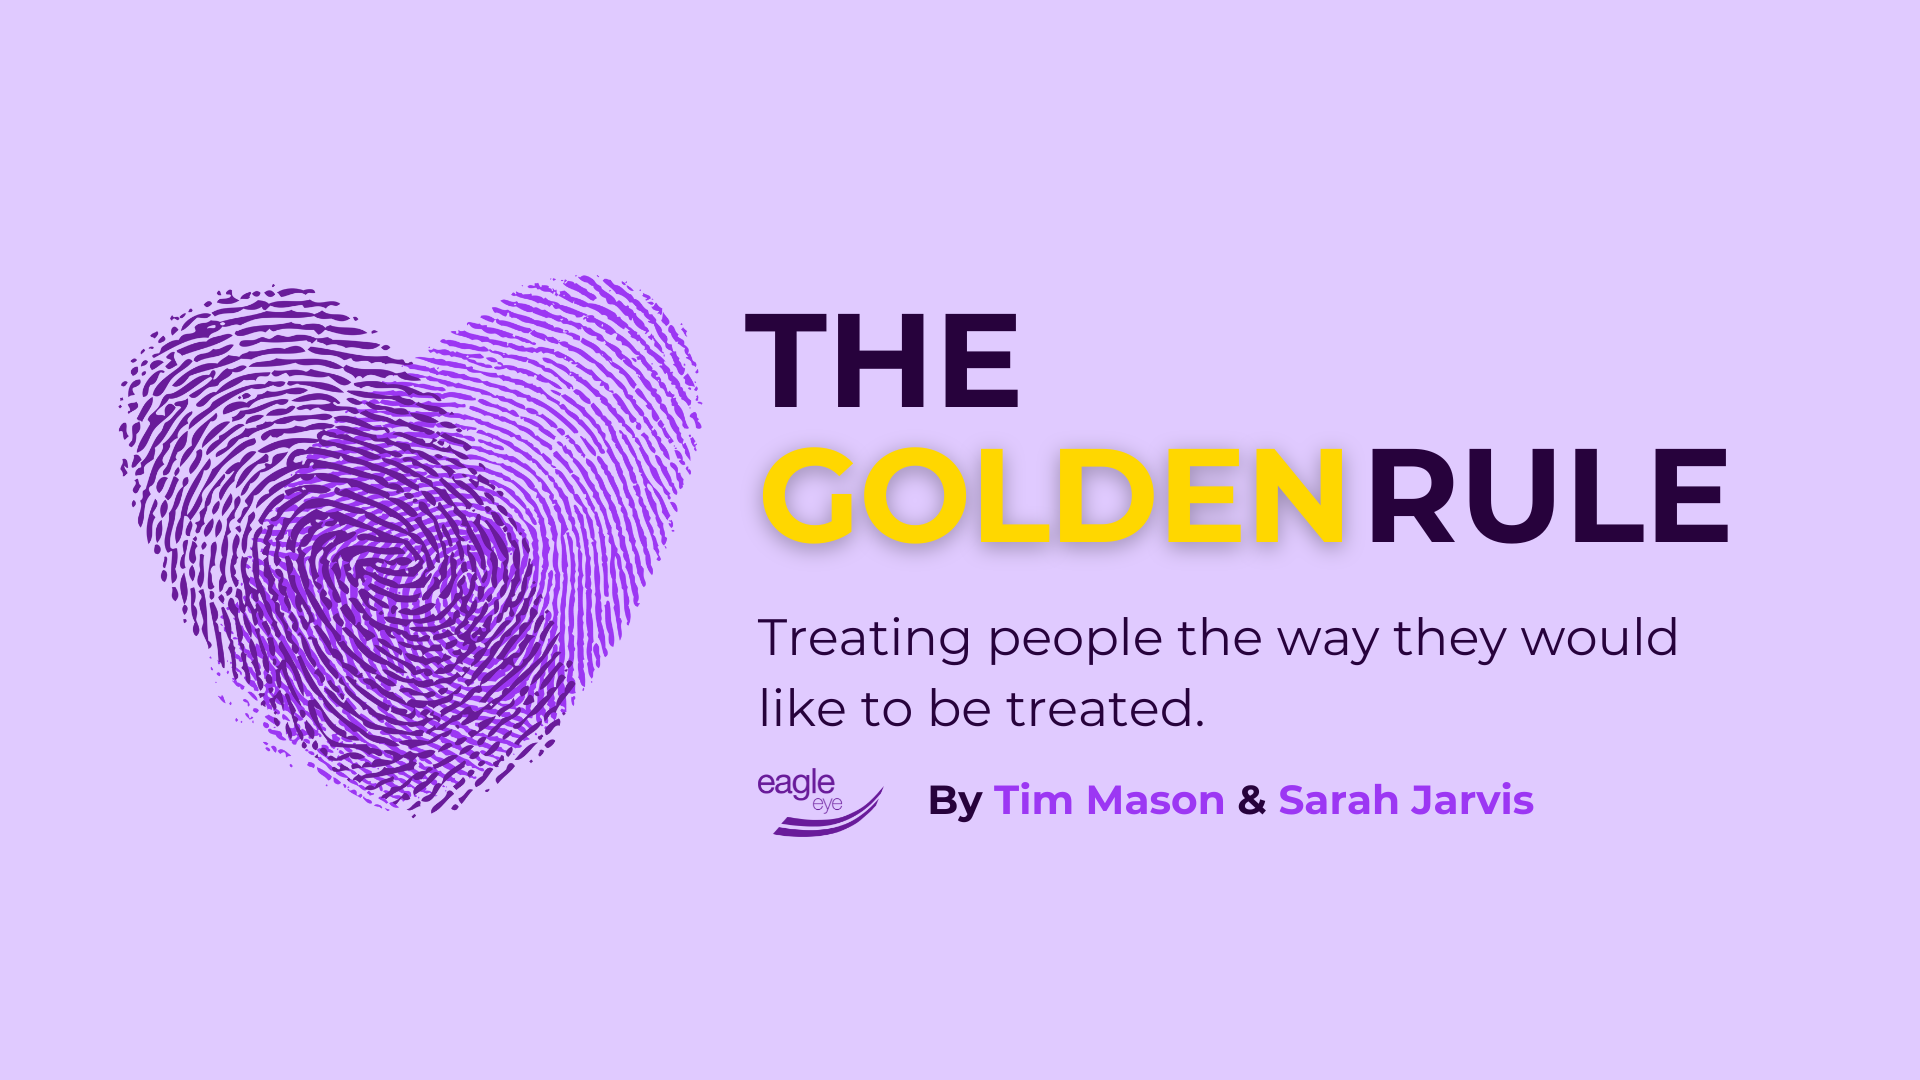 Blog #2: Follow the Golden Rule as the Path to Growth